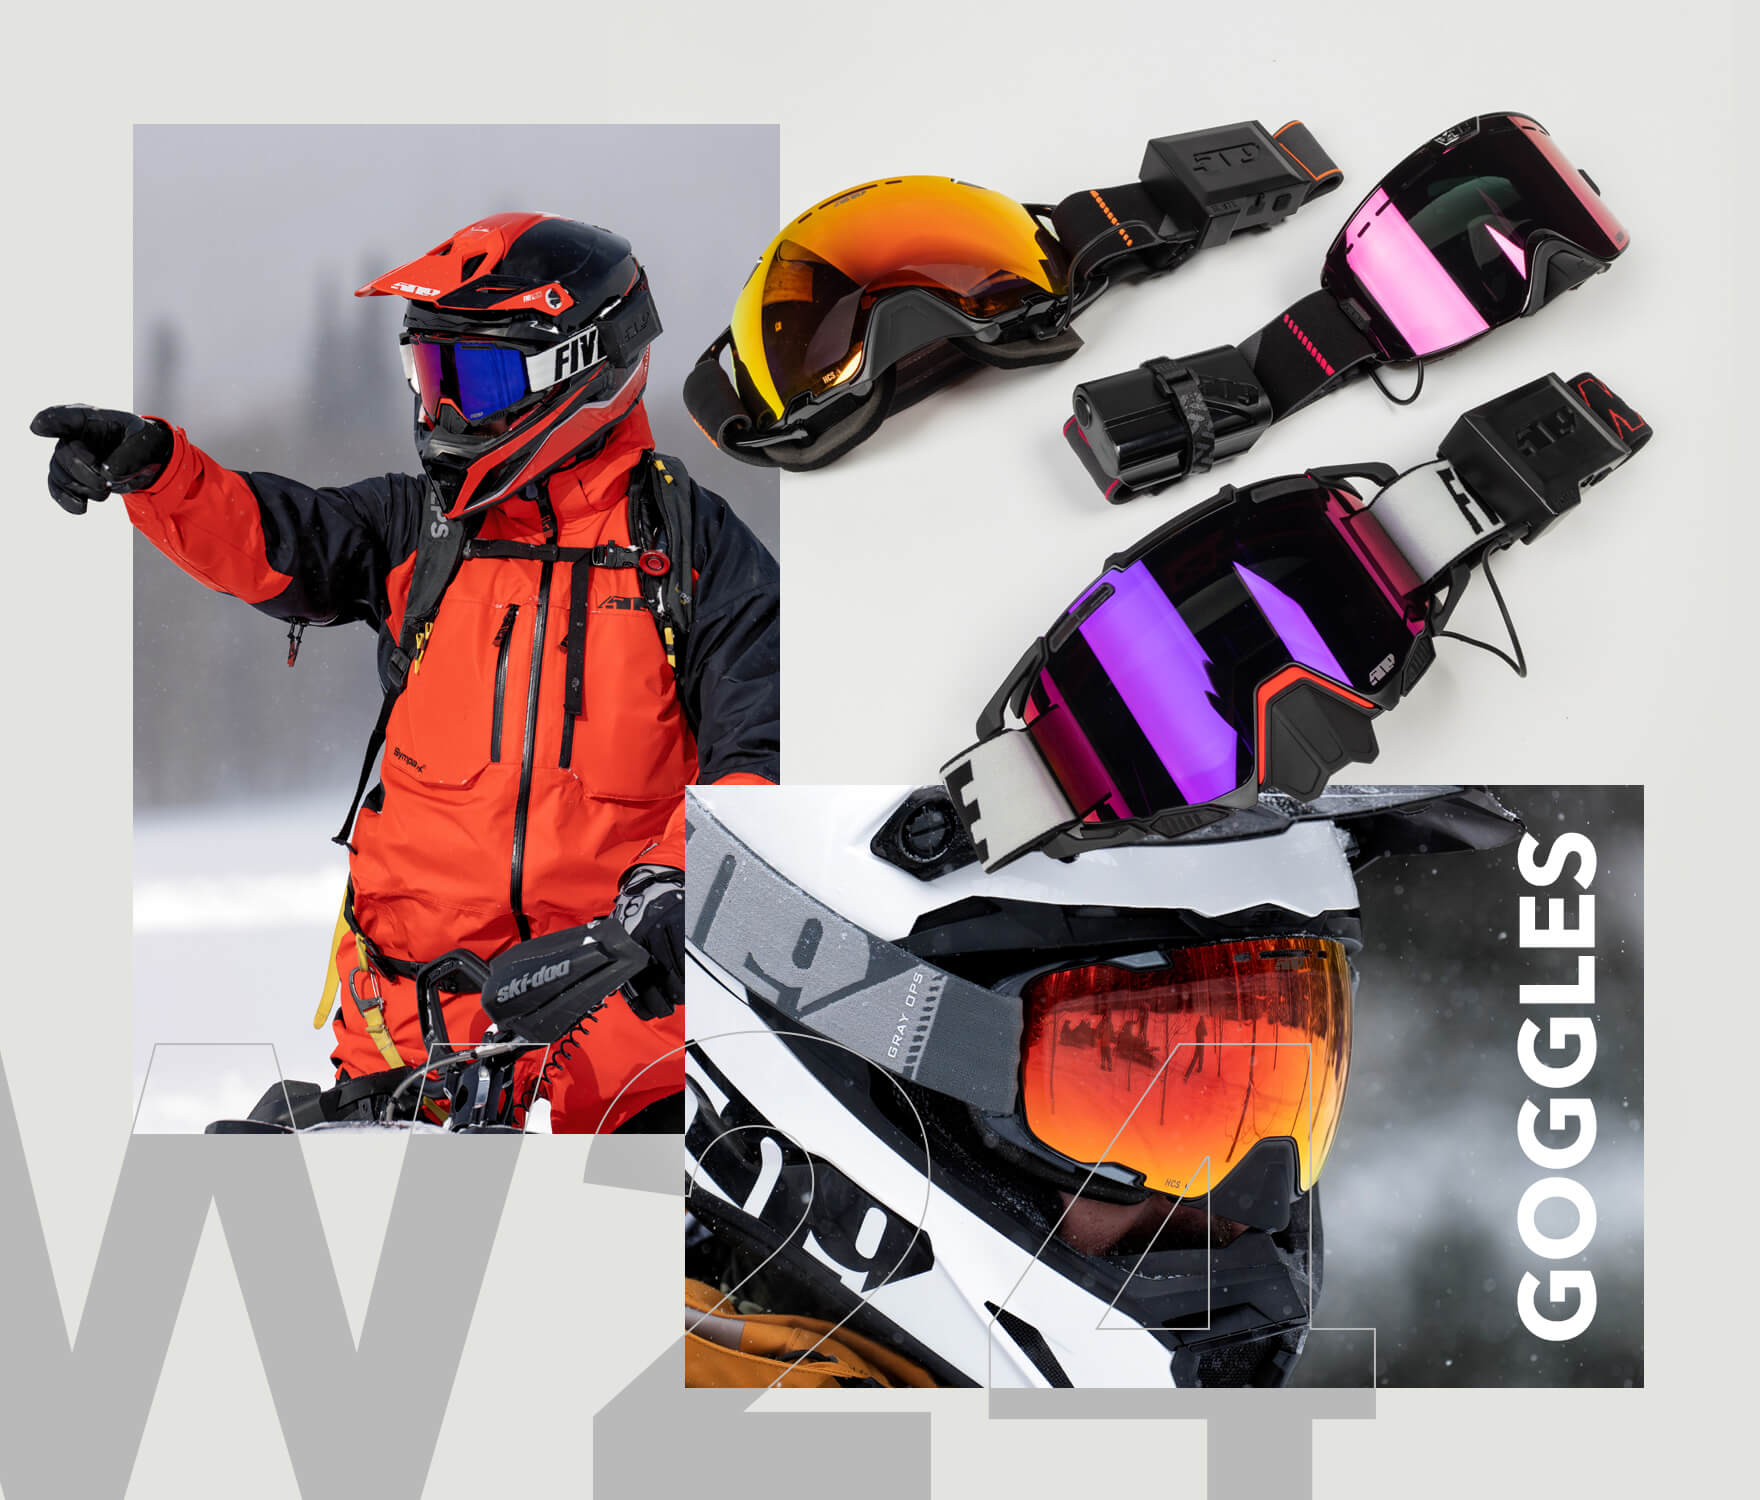 What are the Differences Between the Sinister X7, Aviator 2.0, and Kingpin Snowmobile Goggles?